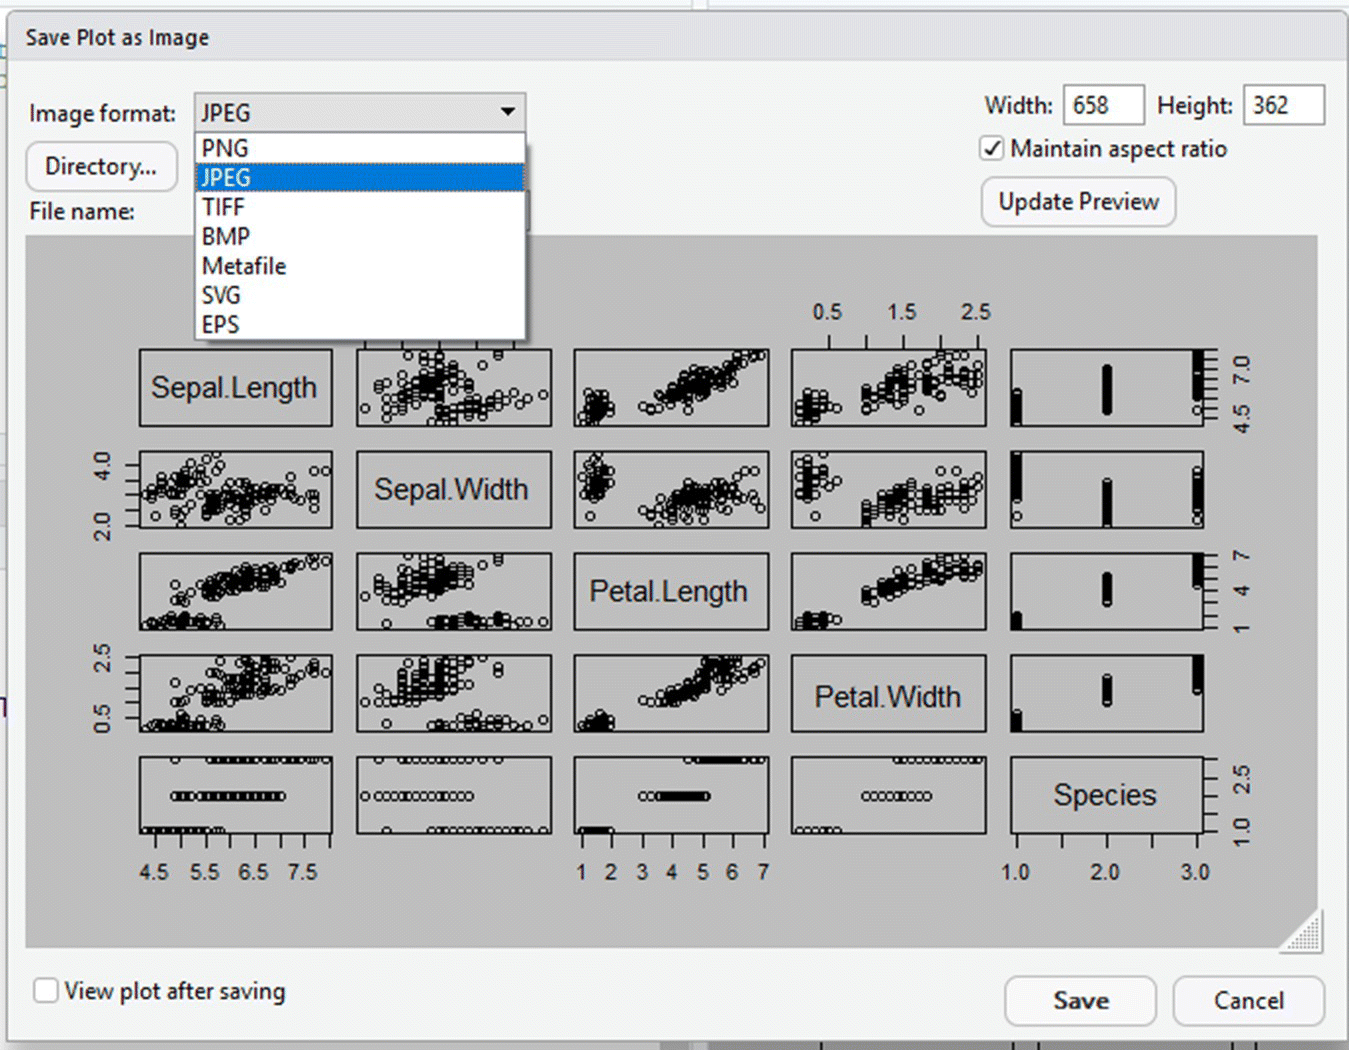 Snipped image of Save Plot as Image dialog box displaying expanded selection box for Image format with options for PNG, JPEG (highlighted), TIFF, BMP, Metafile, SVG, and EPS. Save and Cancel buttons are at the bottom right.